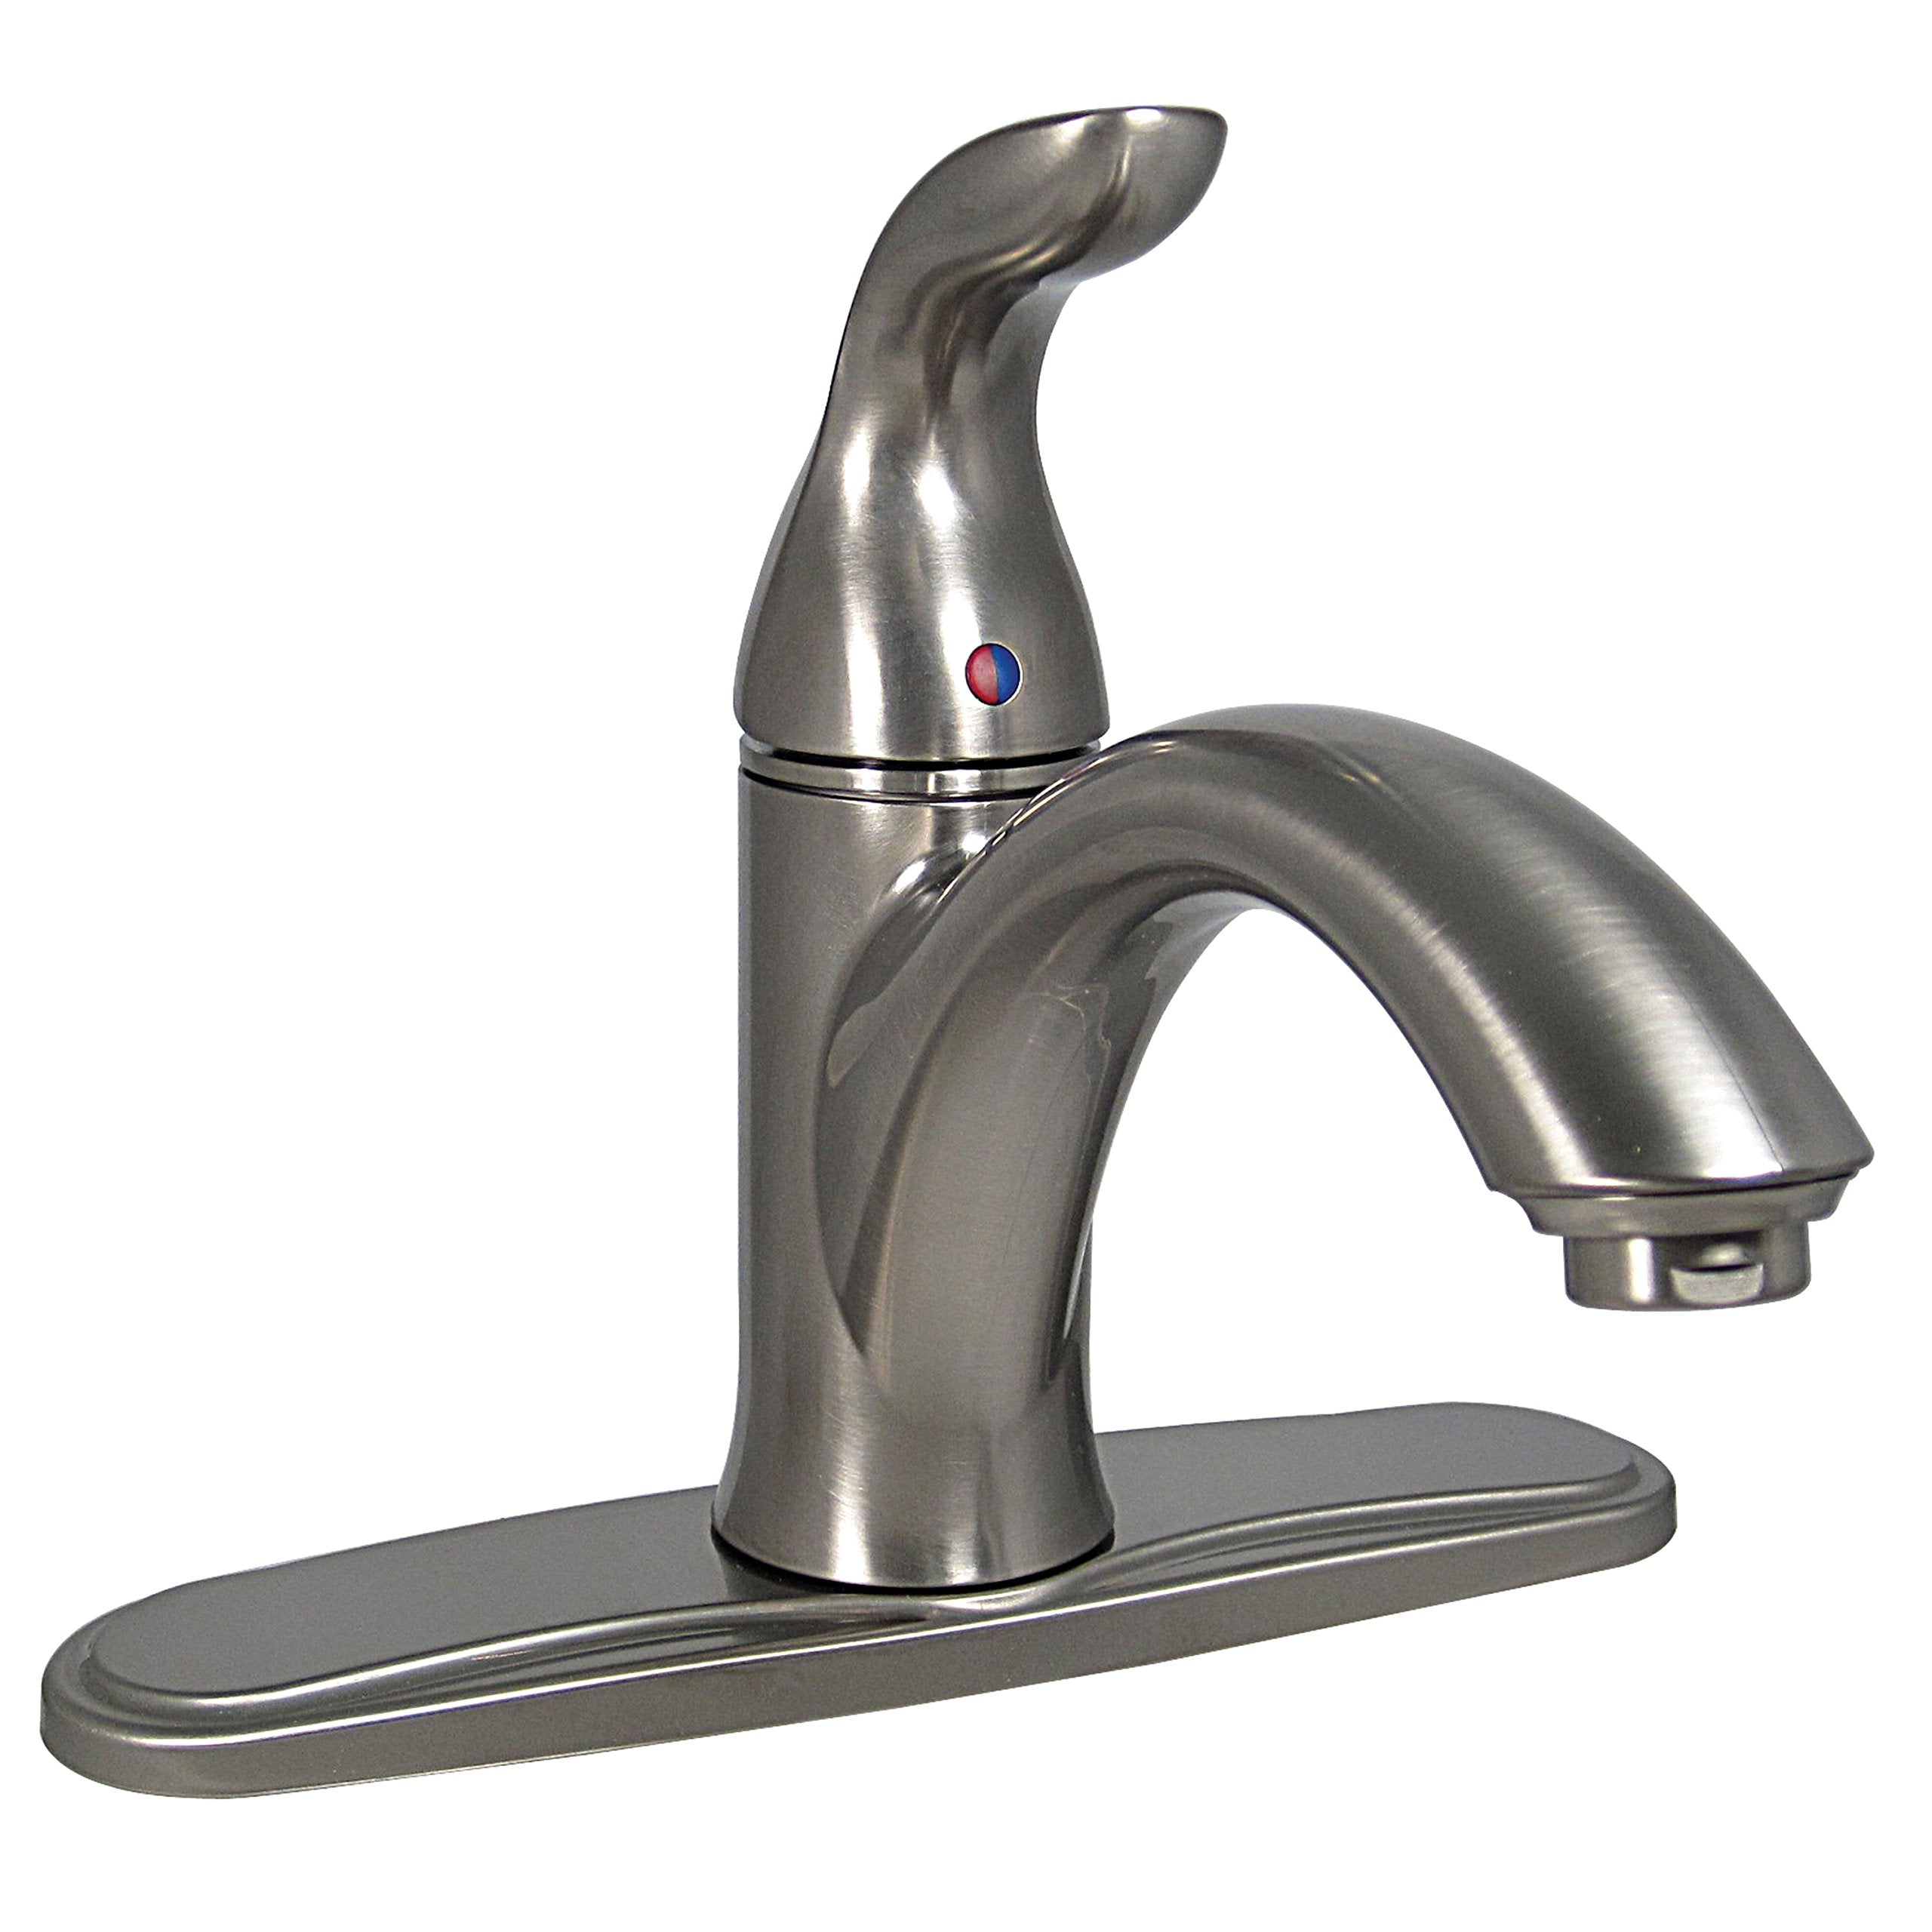 Phoenix PF231422 Single Handle Kitchen Faucet, Brushed Nickel with Side Sprayer